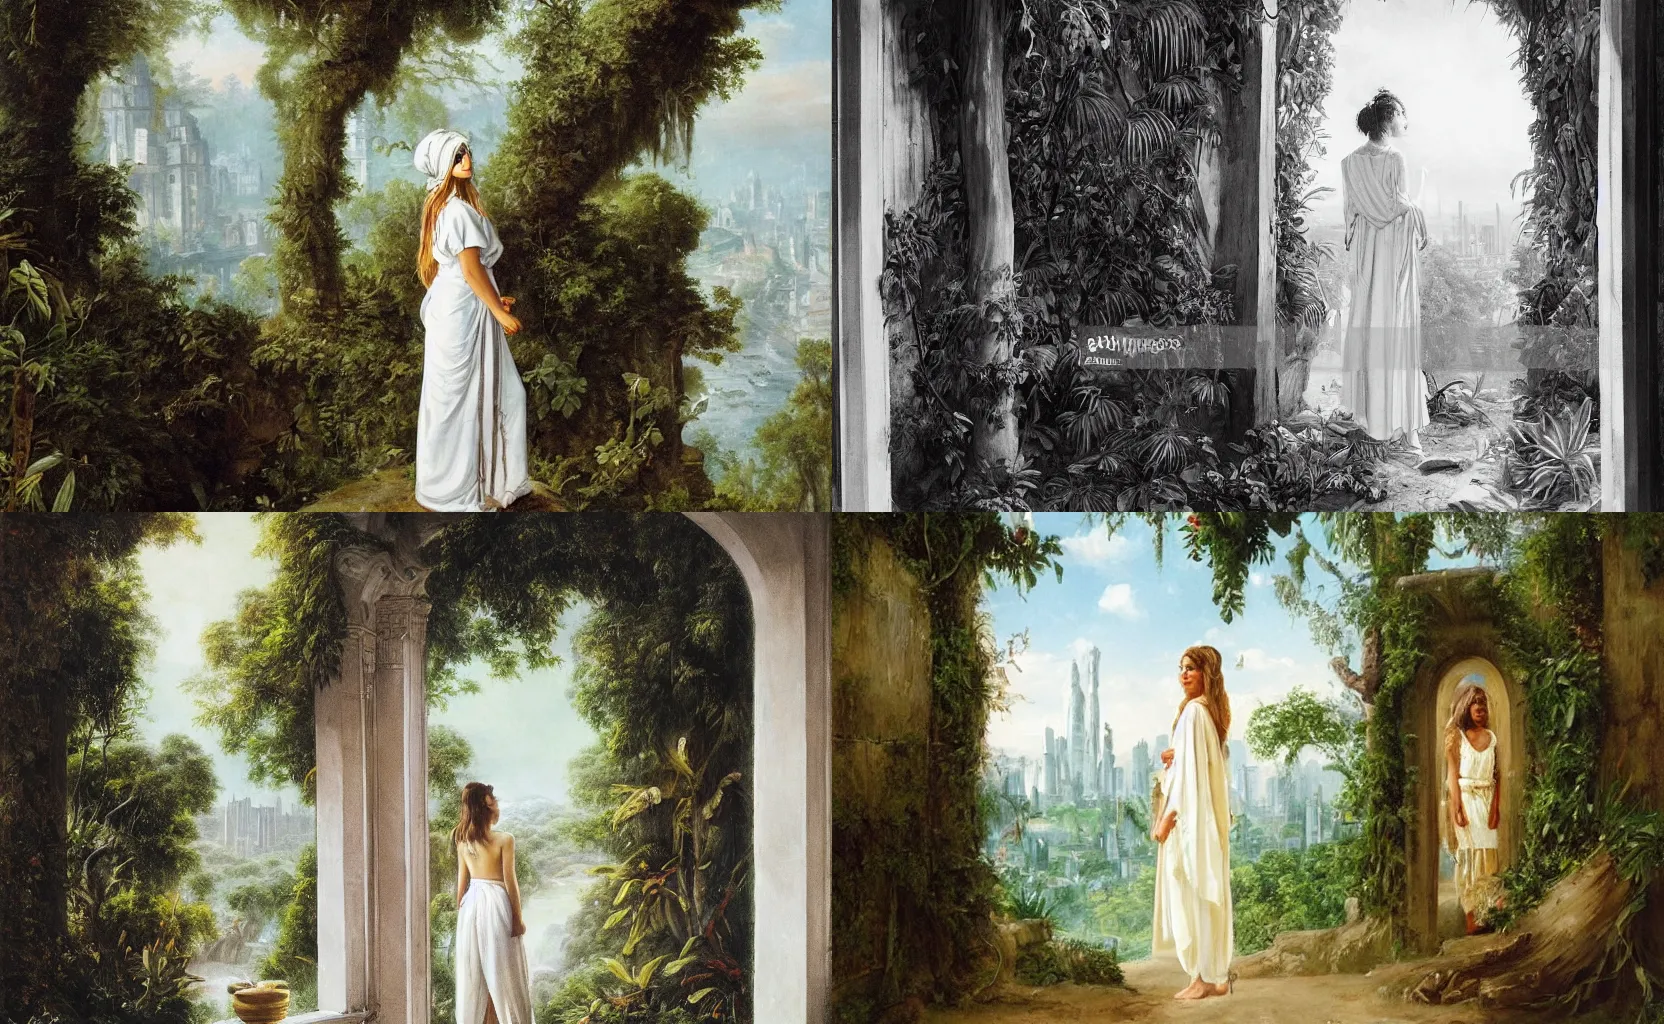 Prompt: A beautiful jungle princess wearing white robes stands in a doorway looking out over a fantastical city, by J. Allen St. John